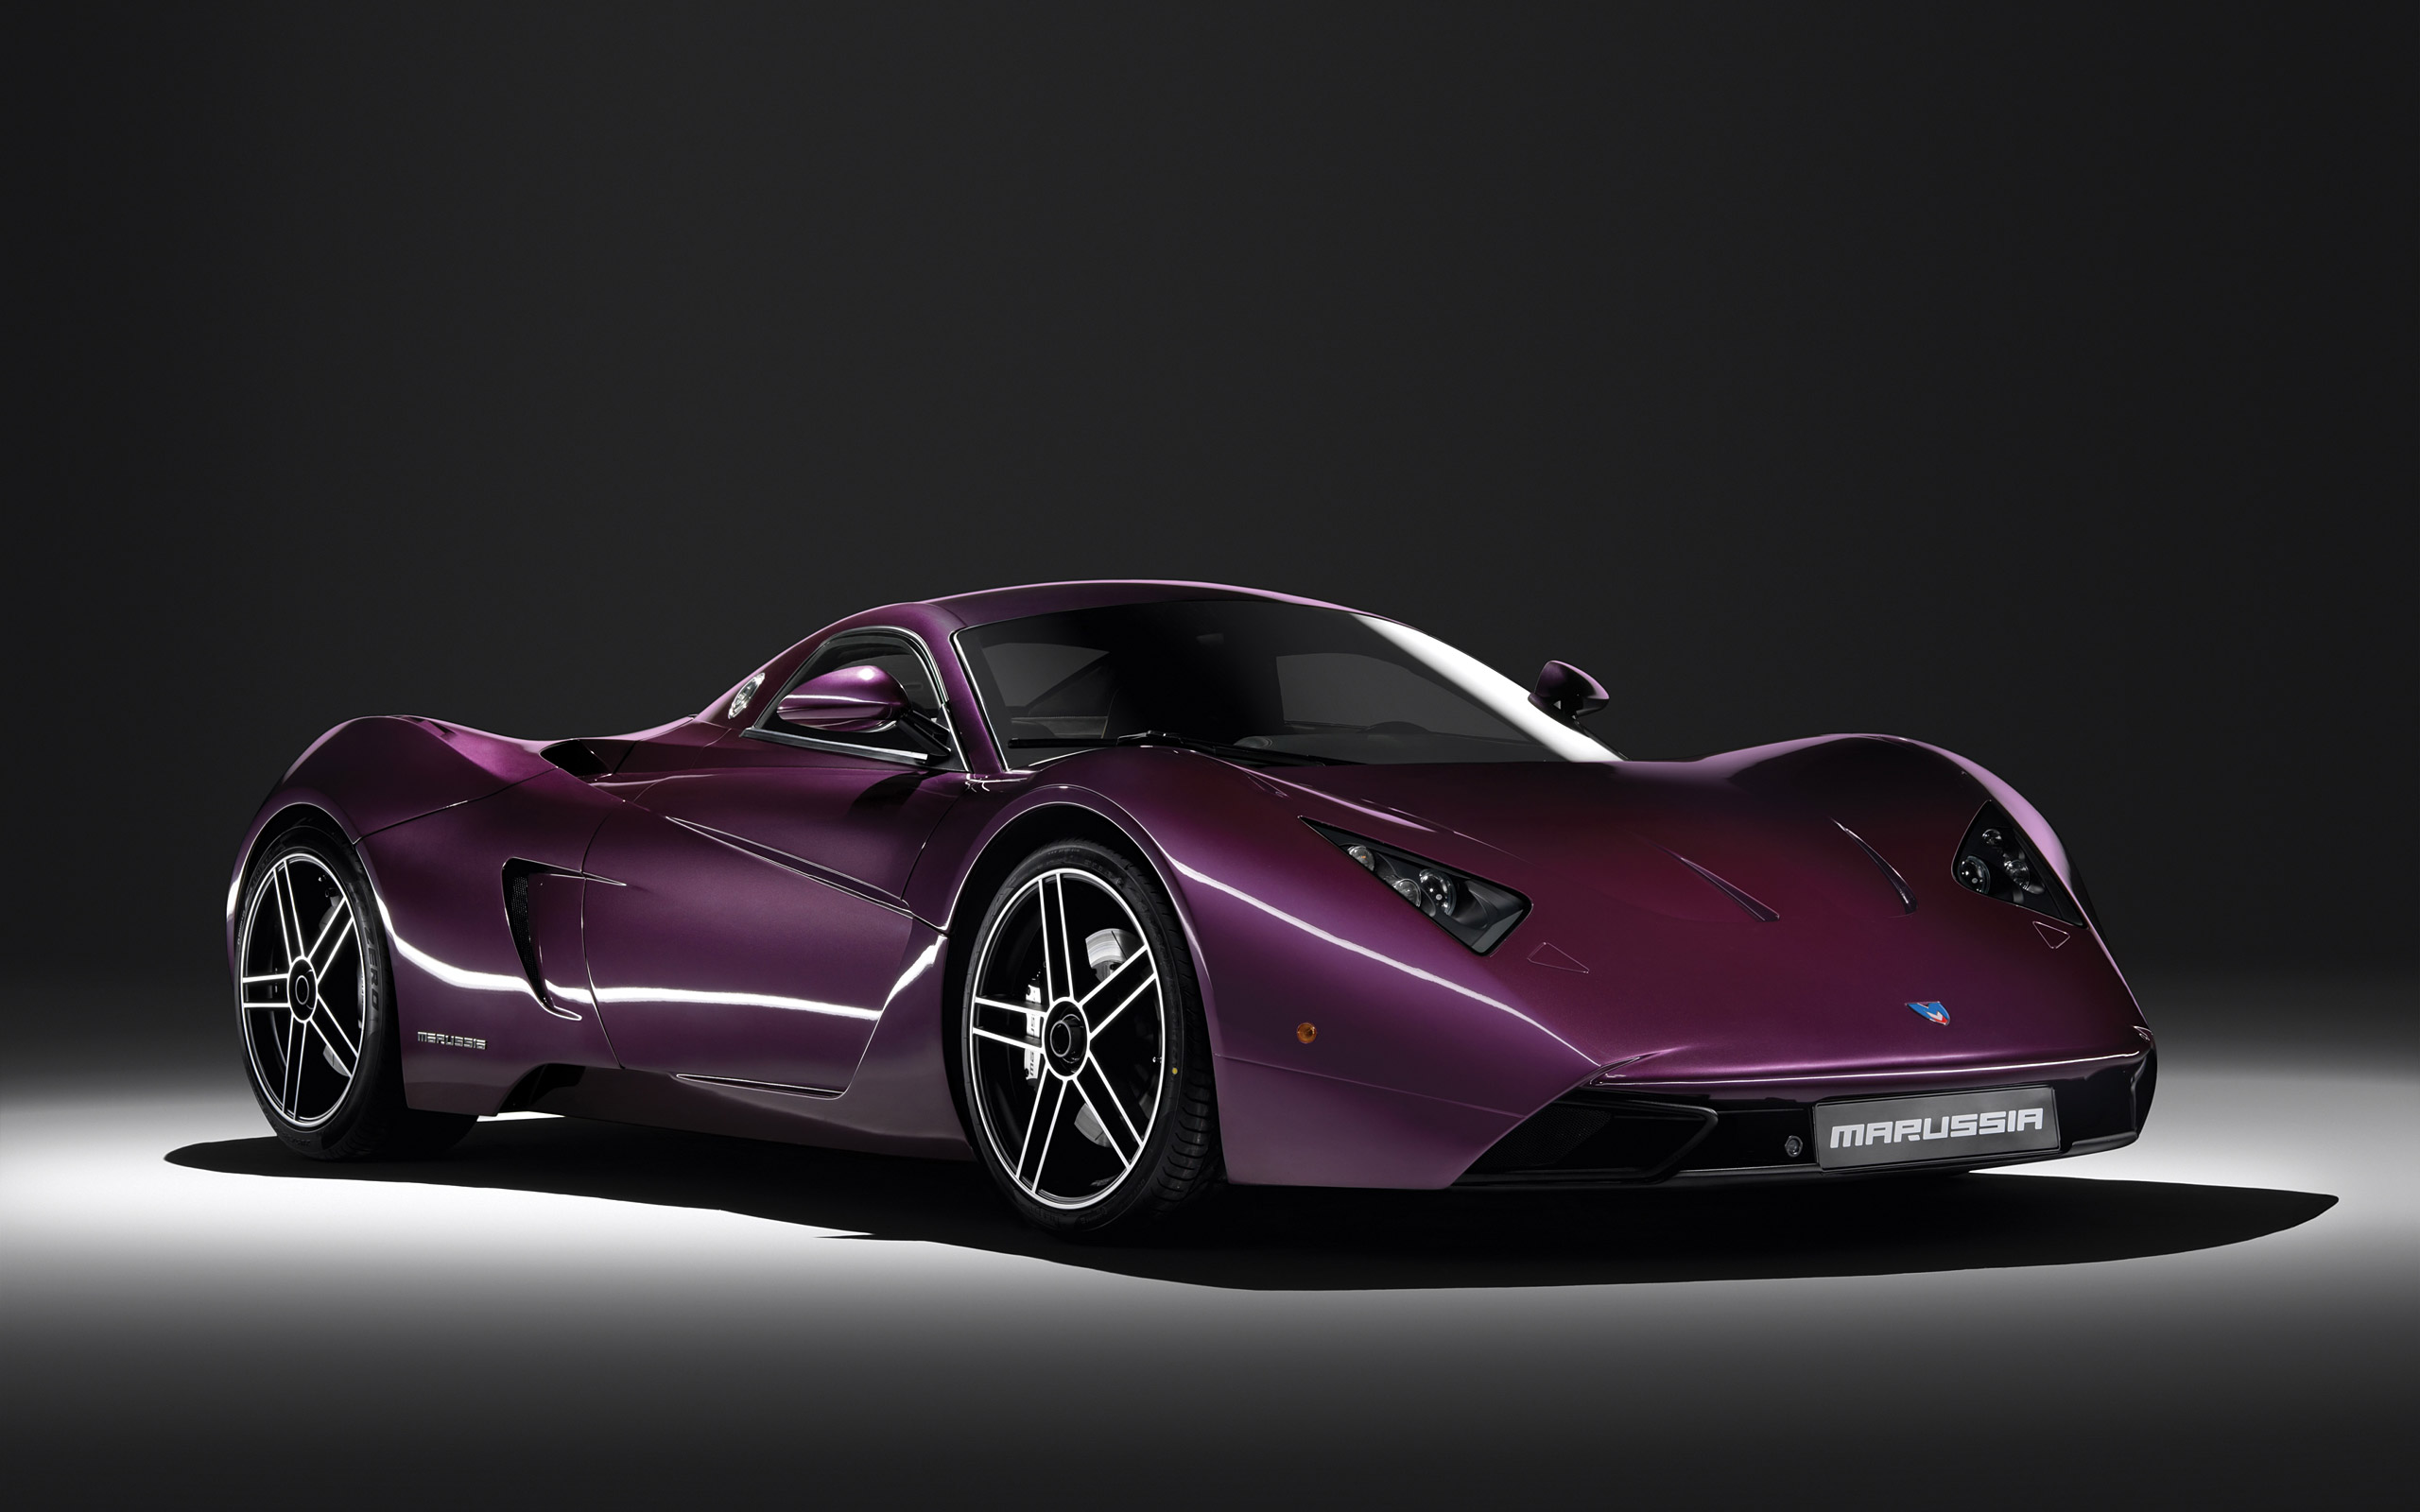 Vehicles Marussia B1 HD Wallpaper | Background Image